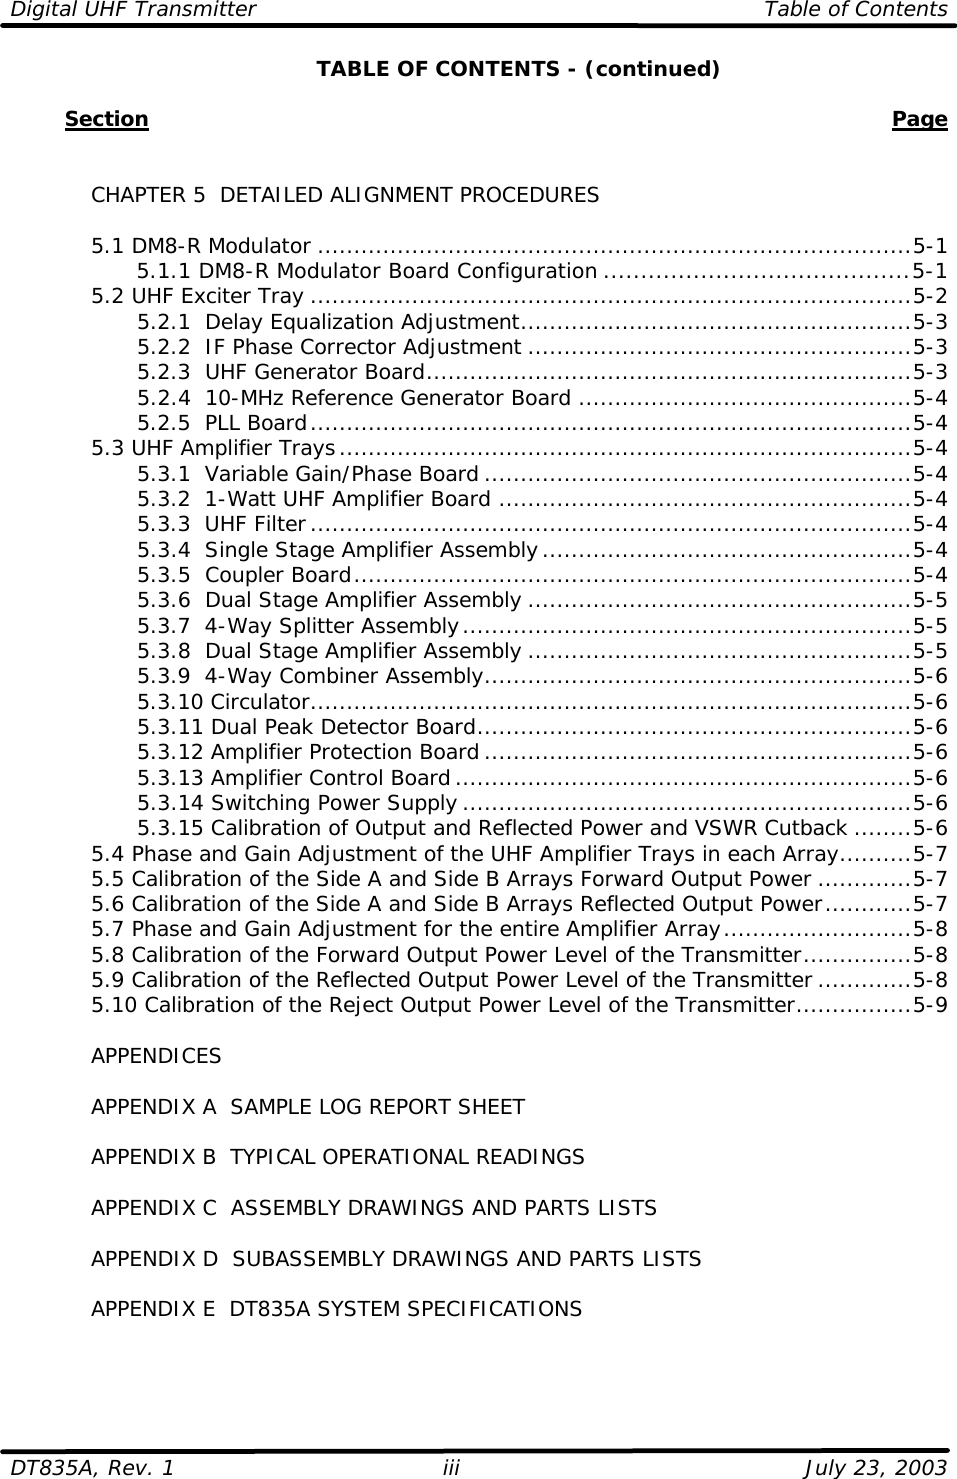 Digital UHF Transmitter Table of Contents  DT835A, Rev. 1 iii July 23, 2003  TABLE OF CONTENTS - (continued)          Section    Page      CHAPTER 5  DETAILED ALIGNMENT PROCEDURES   5.1 DM8-R Modulator ..................................................................................5-1     5.1.1 DM8-R Modulator Board Configuration .........................................5-1  5.2 UHF Exciter Tray ...................................................................................5-2     5.2.1  Delay Equalization Adjustment......................................................5-3     5.2.2  IF Phase Corrector Adjustment .....................................................5-3     5.2.3  UHF Generator Board...................................................................5-3     5.2.4  10-MHz Reference Generator Board ..............................................5-4     5.2.5  PLL Board...................................................................................5-4  5.3 UHF Amplifier Trays...............................................................................5-4     5.3.1  Variable Gain/Phase Board ...........................................................5-4     5.3.2  1-Watt UHF Amplifier Board .........................................................5-4     5.3.3  UHF Filter...................................................................................5-4     5.3.4  Single Stage Amplifier Assembly...................................................5-4     5.3.5  Coupler Board.............................................................................5-4     5.3.6  Dual Stage Amplifier Assembly .....................................................5-5     5.3.7  4-Way Splitter Assembly..............................................................5-5     5.3.8  Dual Stage Amplifier Assembly .....................................................5-5     5.3.9  4-Way Combiner Assembly...........................................................5-6     5.3.10 Circulator...................................................................................5-6     5.3.11 Dual Peak Detector Board............................................................5-6     5.3.12 Amplifier Protection Board ...........................................................5-6     5.3.13 Amplifier Control Board...............................................................5-6     5.3.14 Switching Power Supply ..............................................................5-6     5.3.15 Calibration of Output and Reflected Power and VSWR Cutback ........5-6  5.4 Phase and Gain Adjustment of the UHF Amplifier Trays in each Array..........5-7  5.5 Calibration of the Side A and Side B Arrays Forward Output Power .............5-7  5.6 Calibration of the Side A and Side B Arrays Reflected Output Power............5-7  5.7 Phase and Gain Adjustment for the entire Amplifier Array..........................5-8  5.8 Calibration of the Forward Output Power Level of the Transmitter...............5-8  5.9 Calibration of the Reflected Output Power Level of the Transmitter .............5-8  5.10 Calibration of the Reject Output Power Level of the Transmitter................5-9   APPENDICES   APPENDIX A  SAMPLE LOG REPORT SHEET   APPENDIX B  TYPICAL OPERATIONAL READINGS   APPENDIX C  ASSEMBLY DRAWINGS AND PARTS LISTS   APPENDIX D  SUBASSEMBLY DRAWINGS AND PARTS LISTS   APPENDIX E  DT835A SYSTEM SPECIFICATIONS 